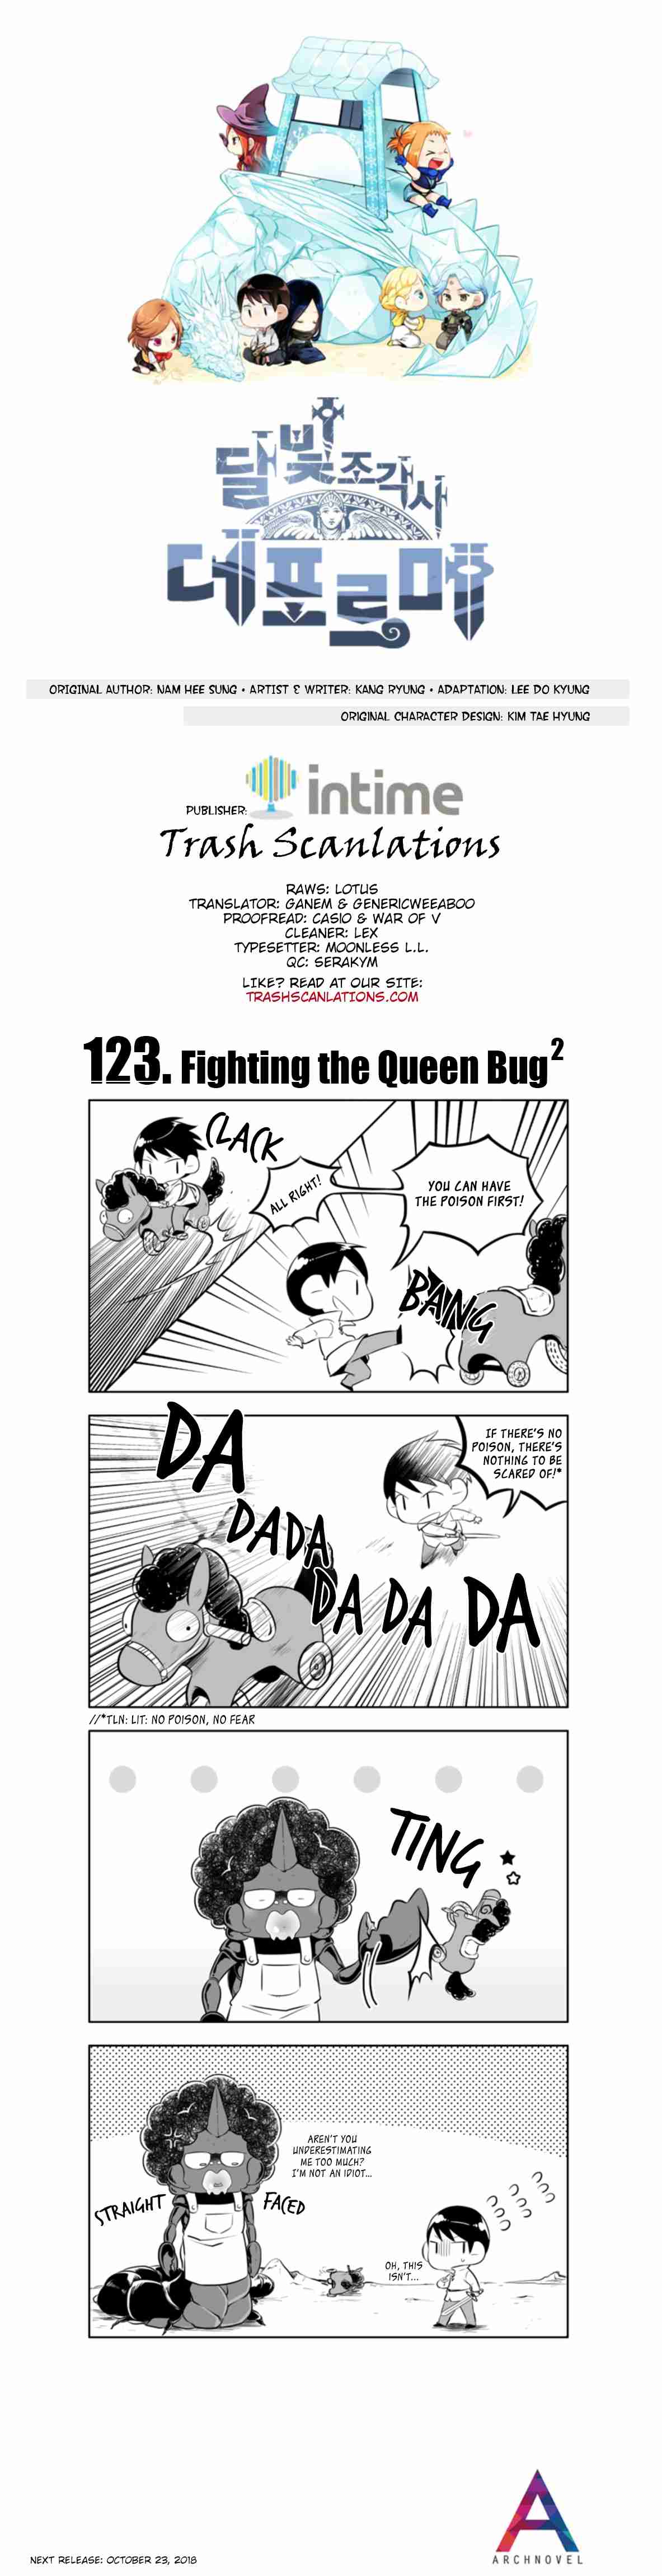 Moonlight Sculptor 4 koma Ch. 123 Fighting the Qeen Bug 2